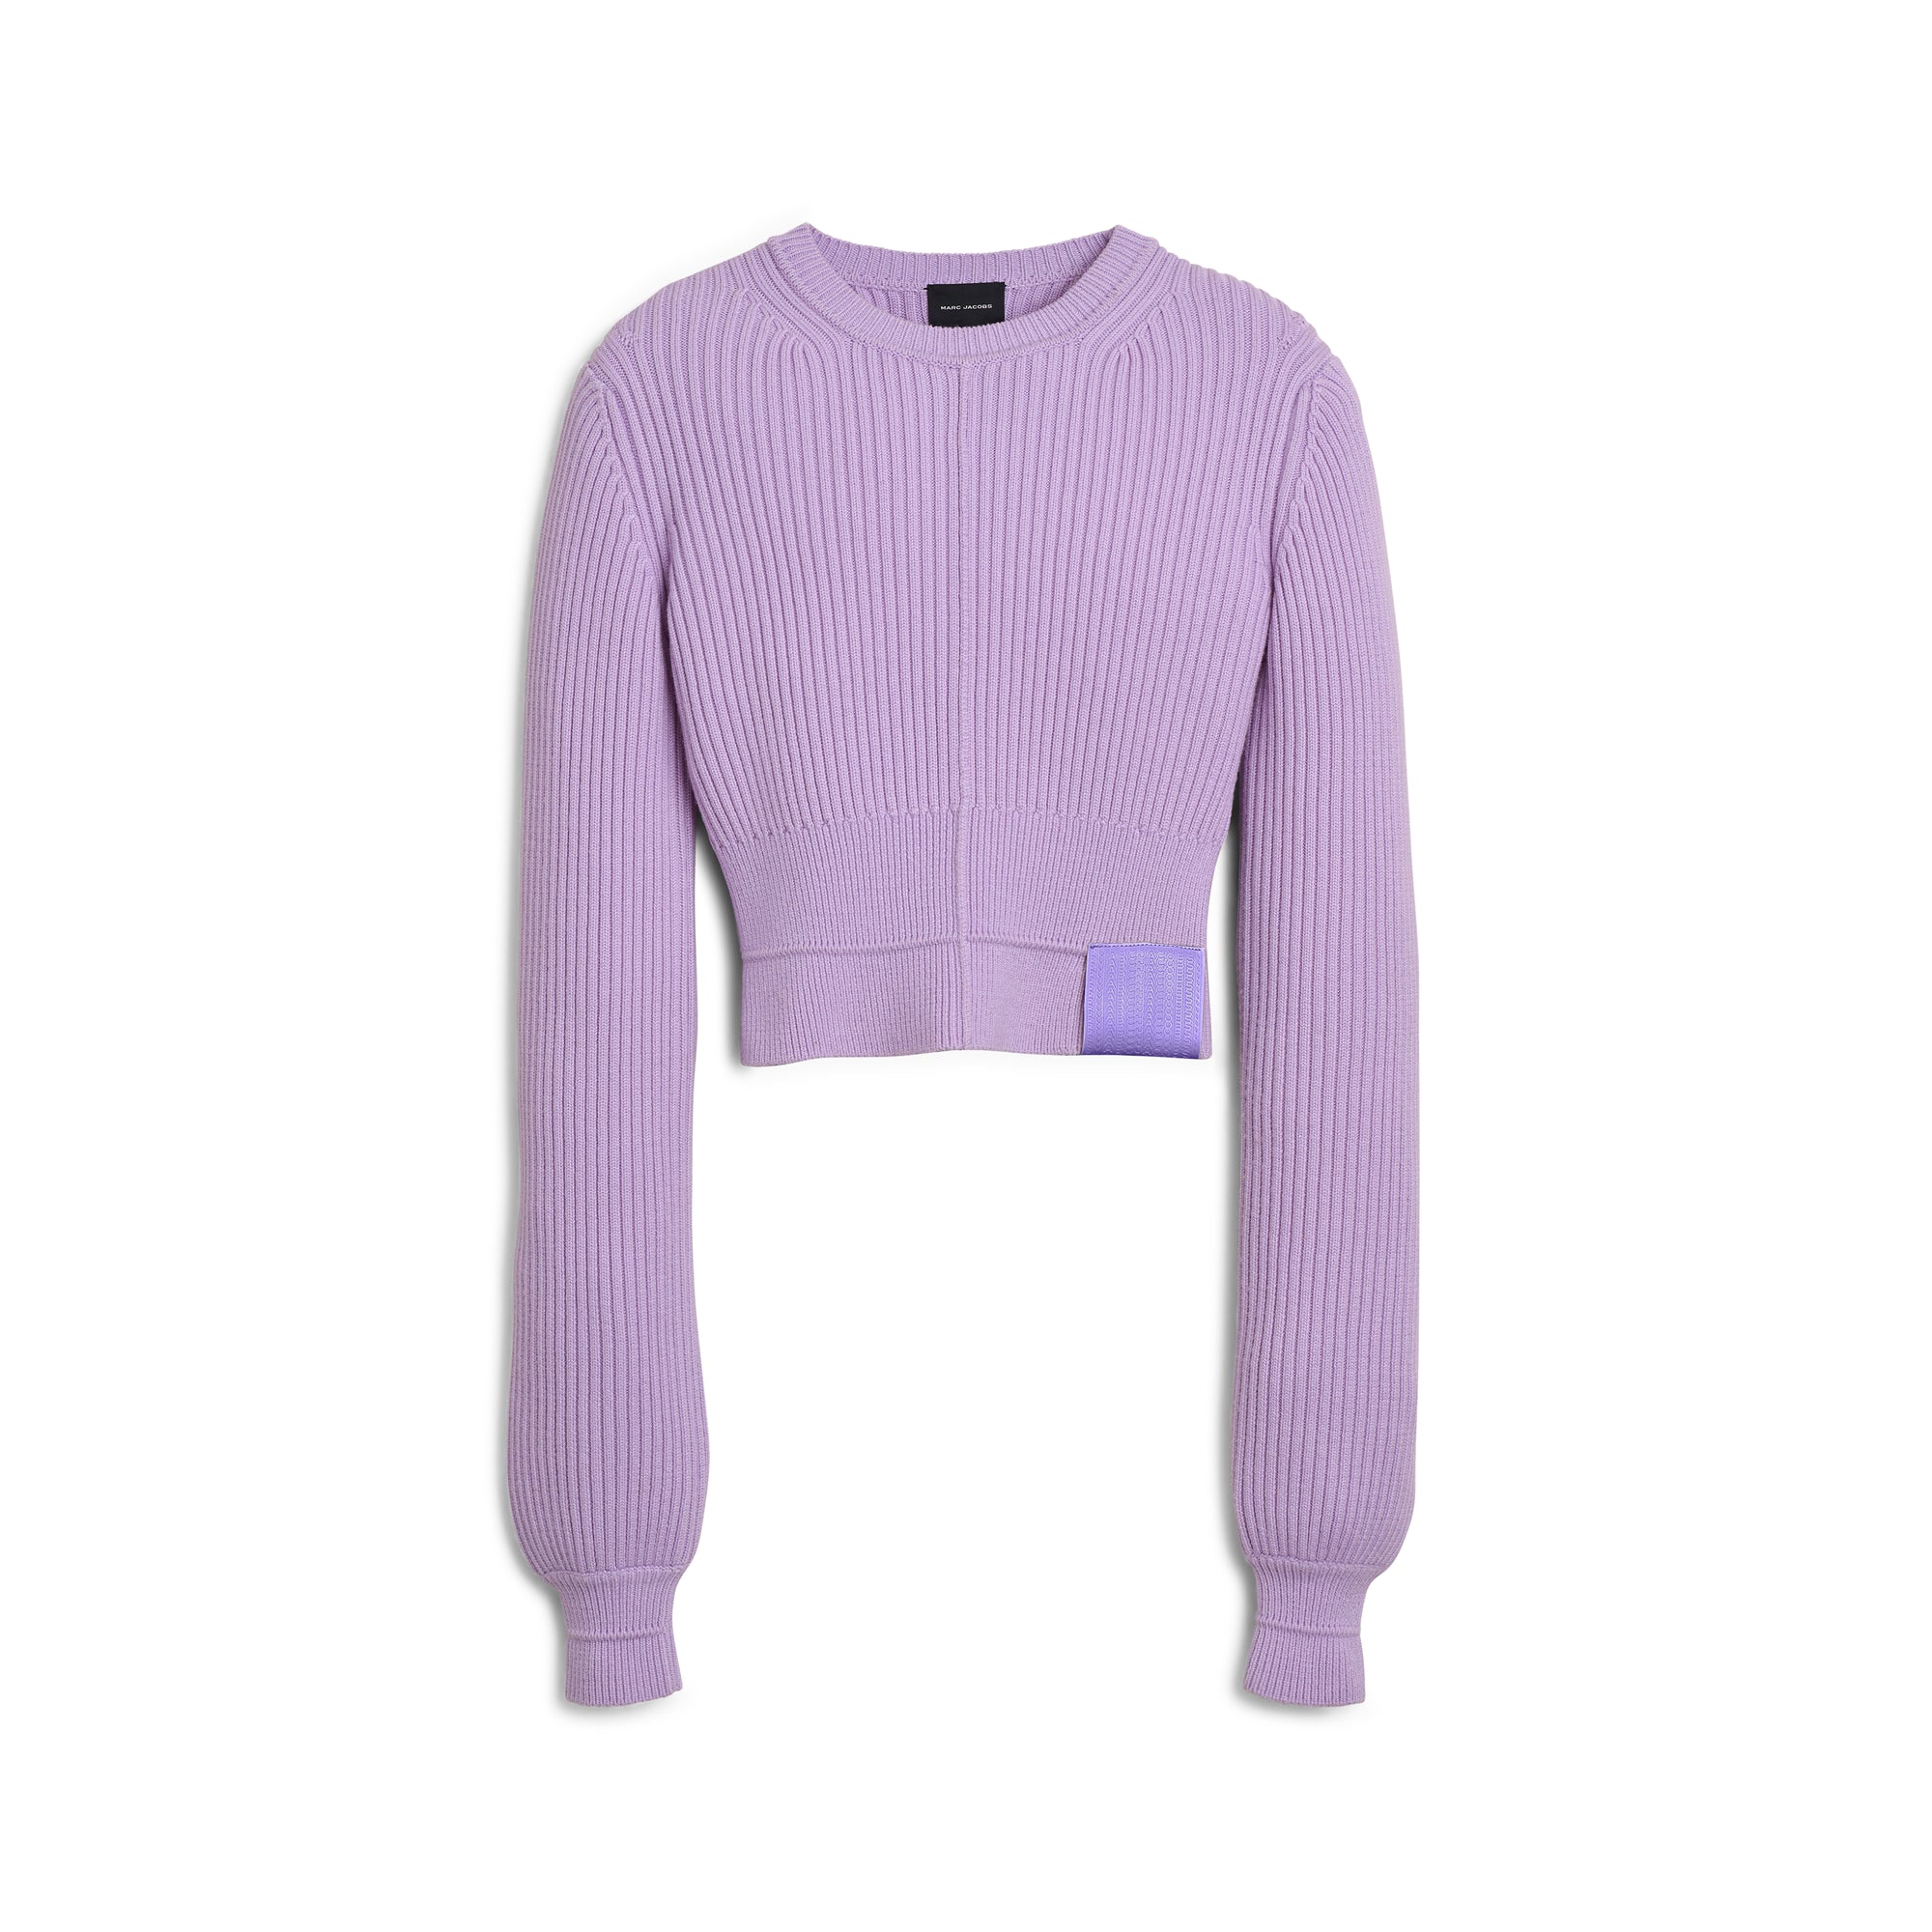 Marc Jacobs - The Femme Crewneck Sweater - (Iced Lavender) view 1